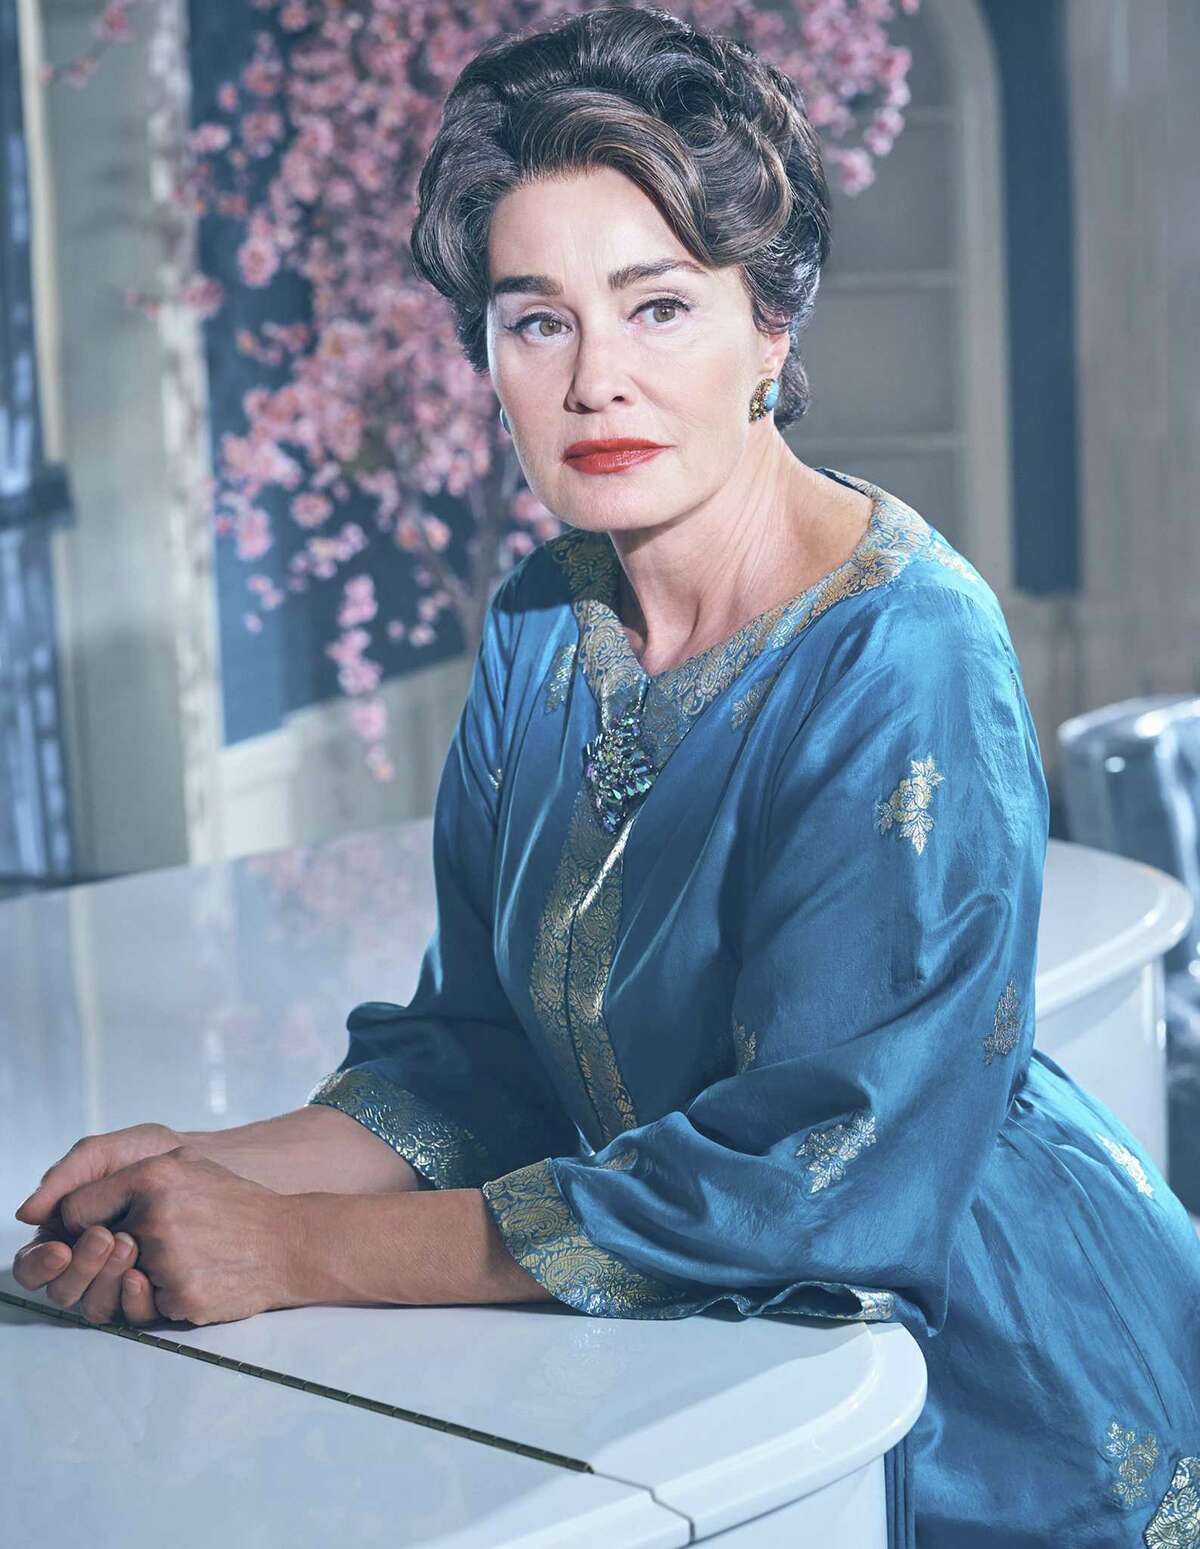 Jessica Lange captures the faded glamour and insecurity of Joan Crawford in “Feud.”